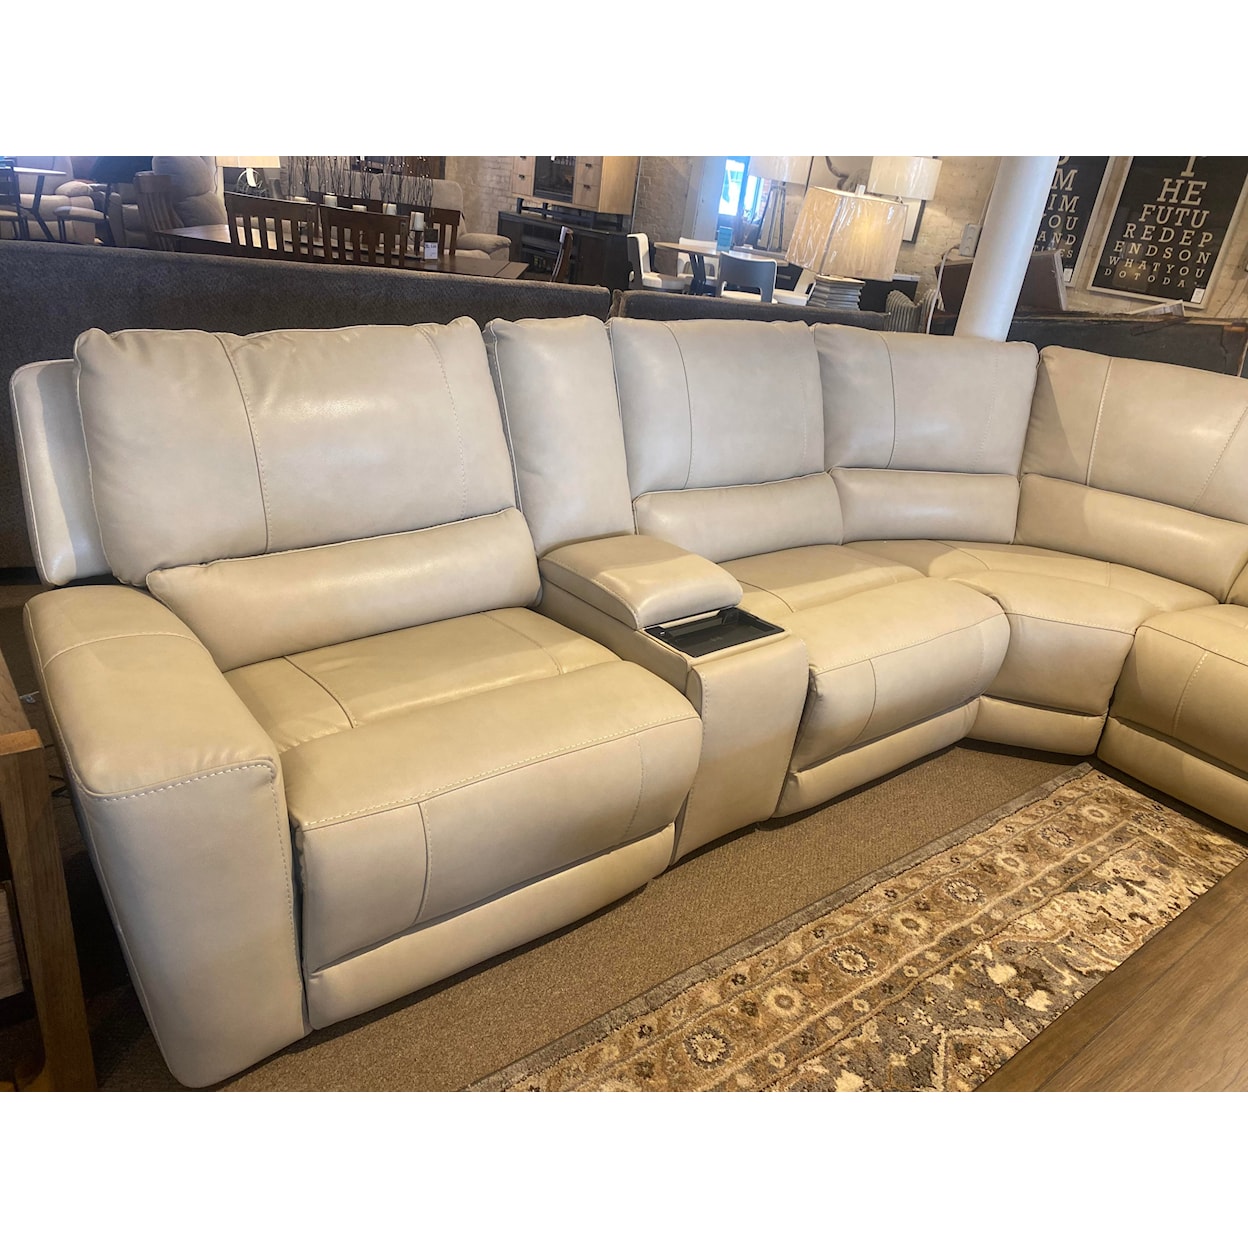 Manwah Manwah Leather Luxury Power Reclining Sectional